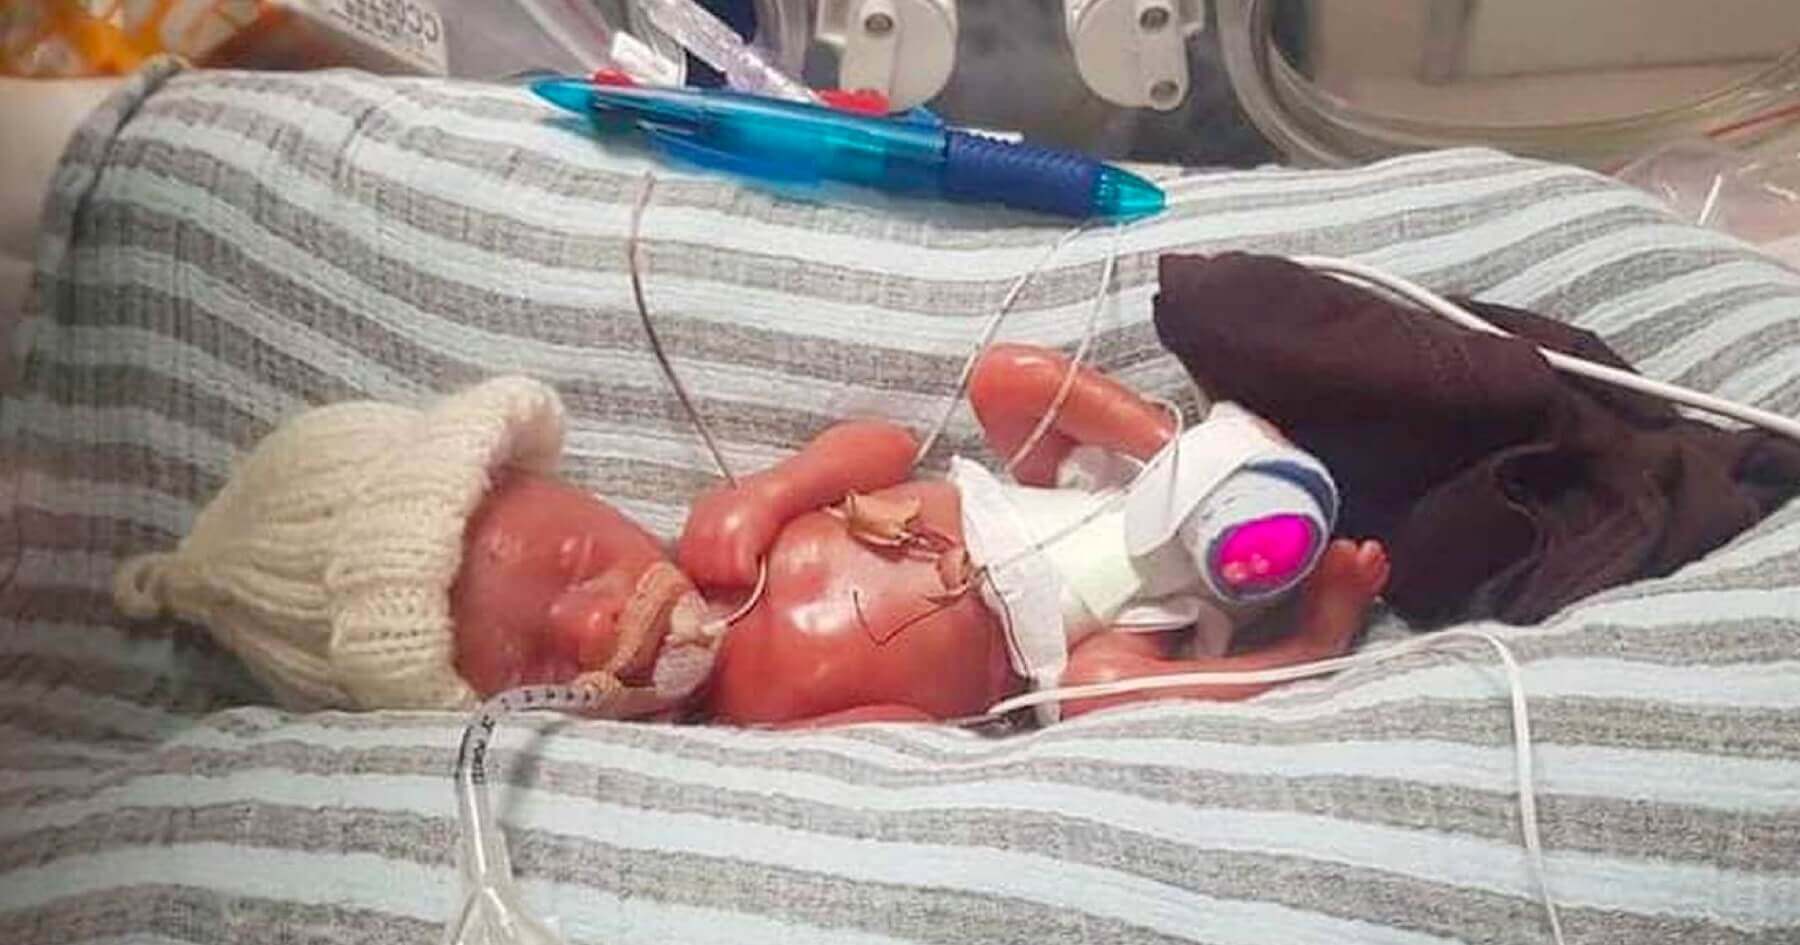 Baby born one week before UK abortion time limit leaves intensive care